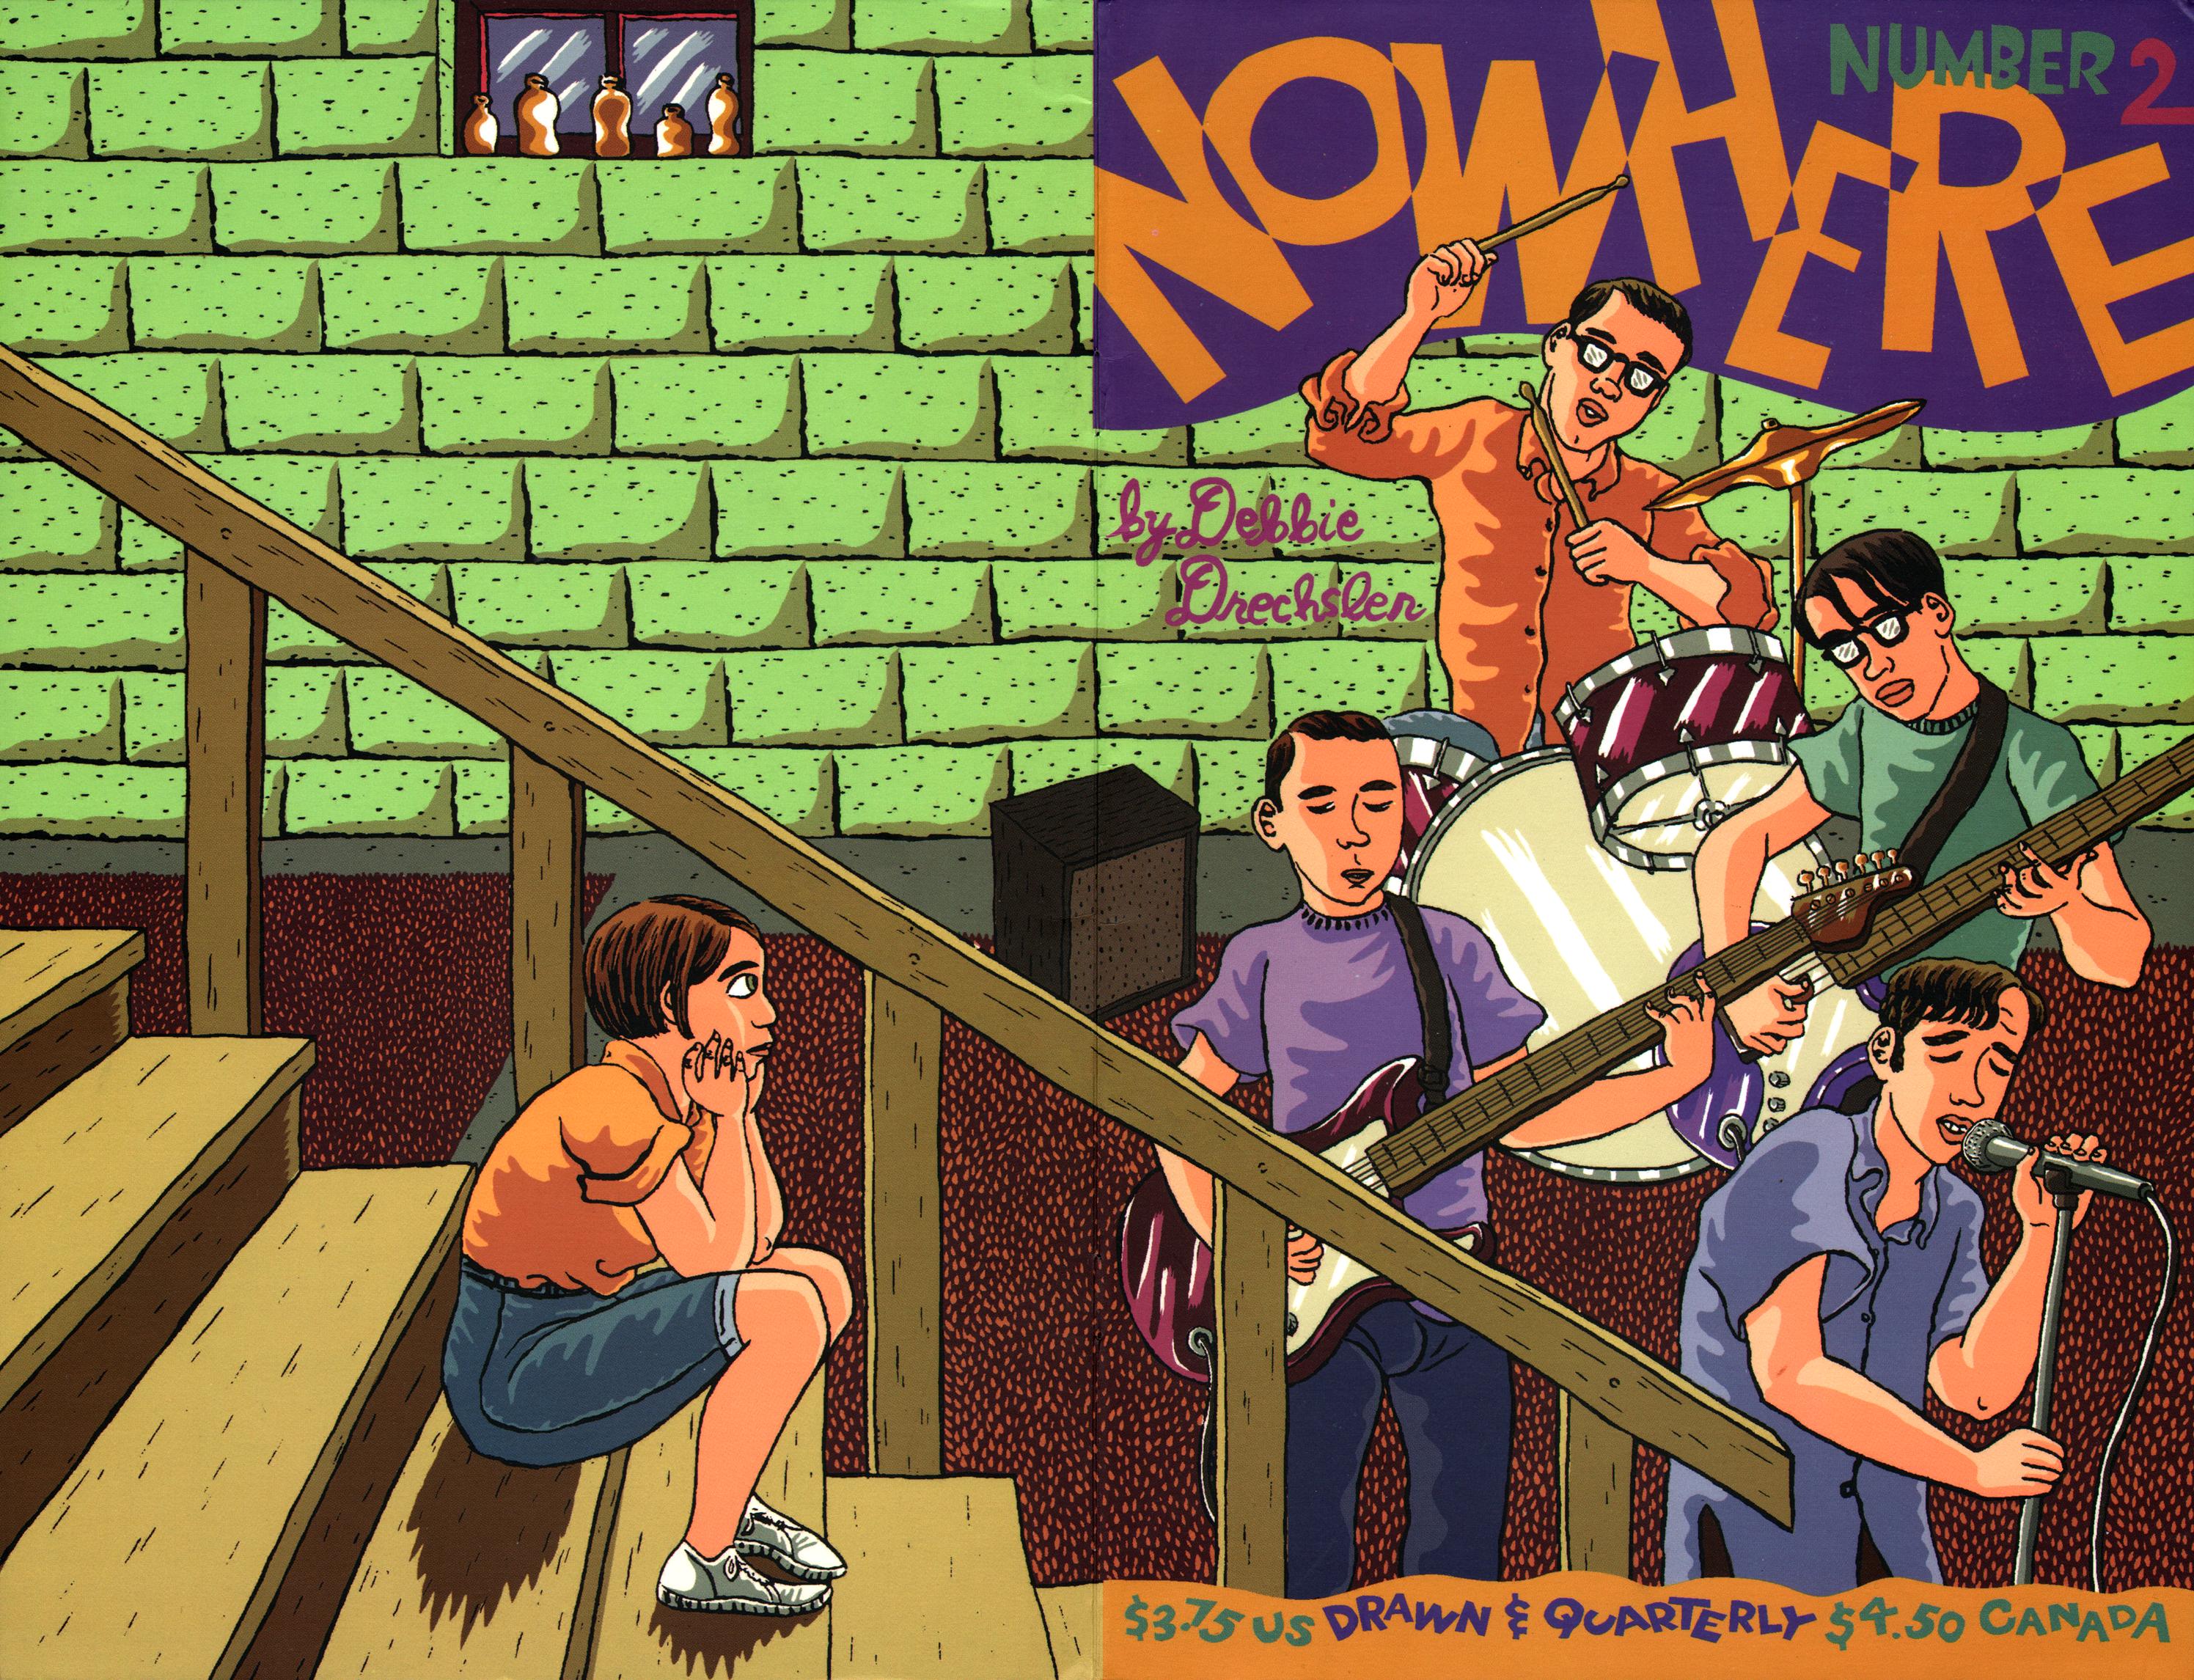 Read online Nowhere comic -  Issue #2 - 1